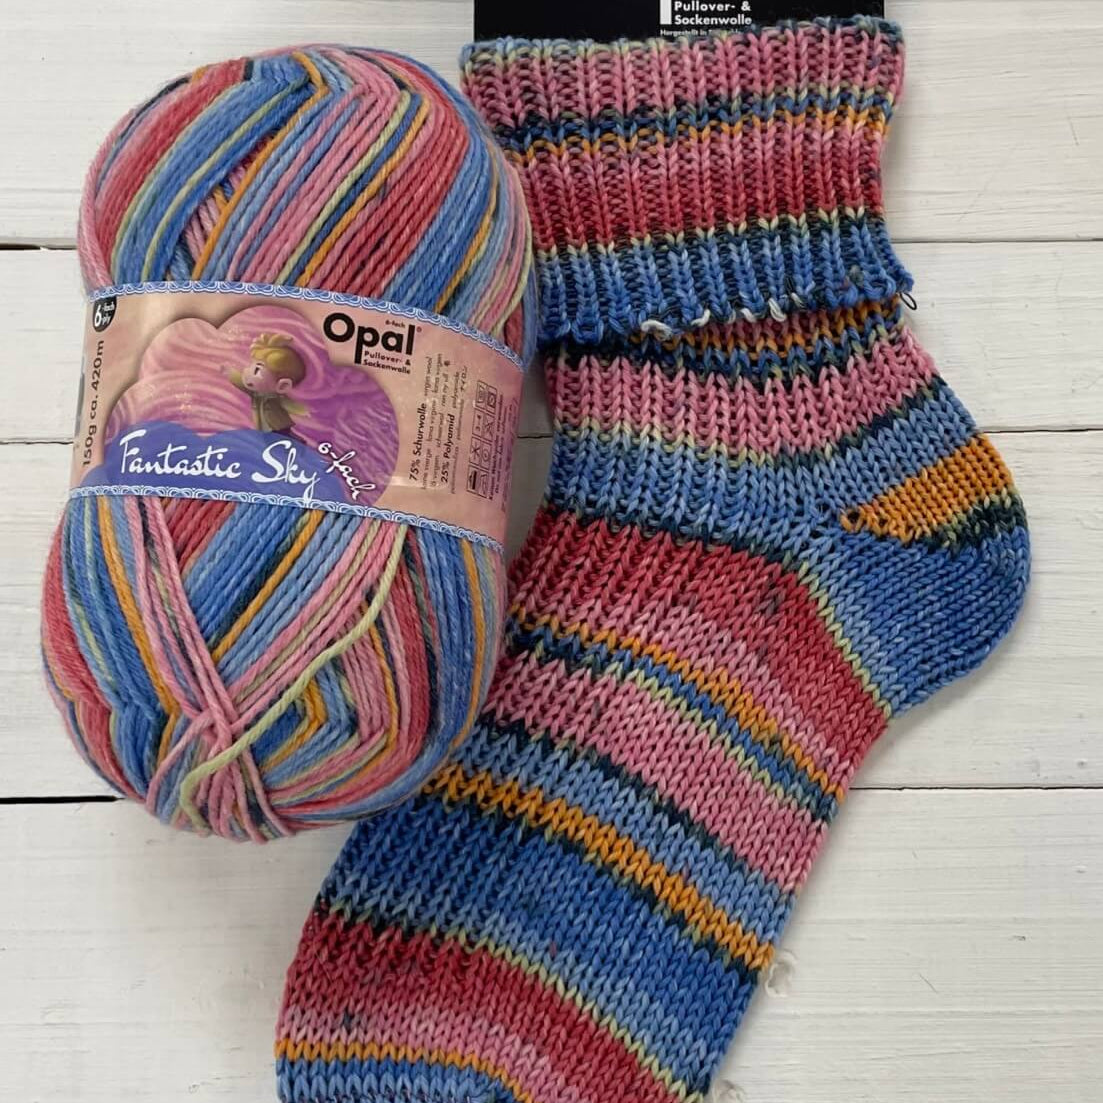 pink and blue knitted sock multicoloured opal 6ply sock wool yarn 